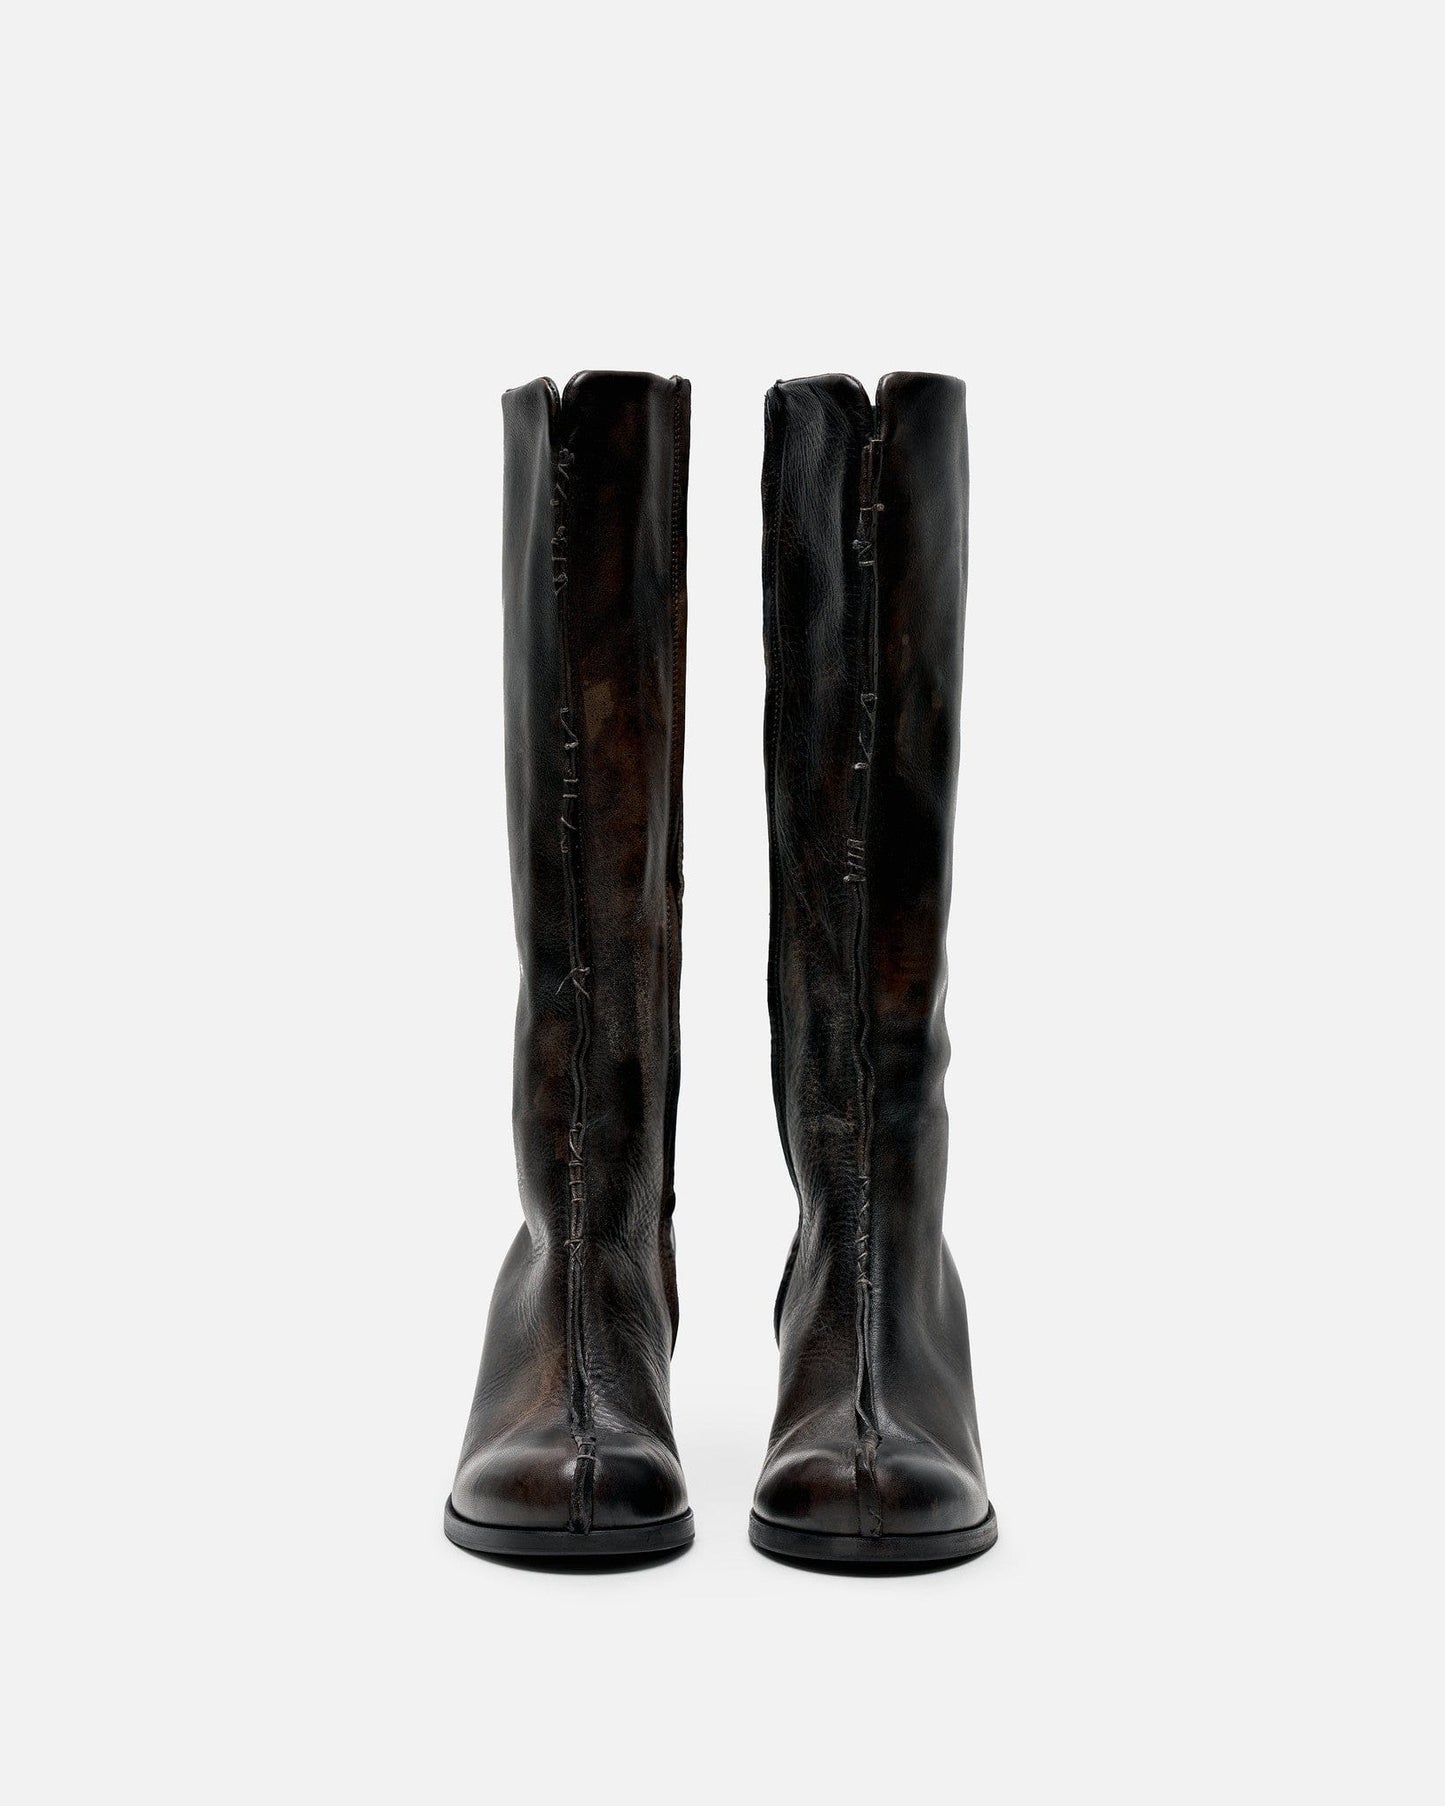 Edward Cuming Women's Shoes Knee High Boots in Aged Black/Brown